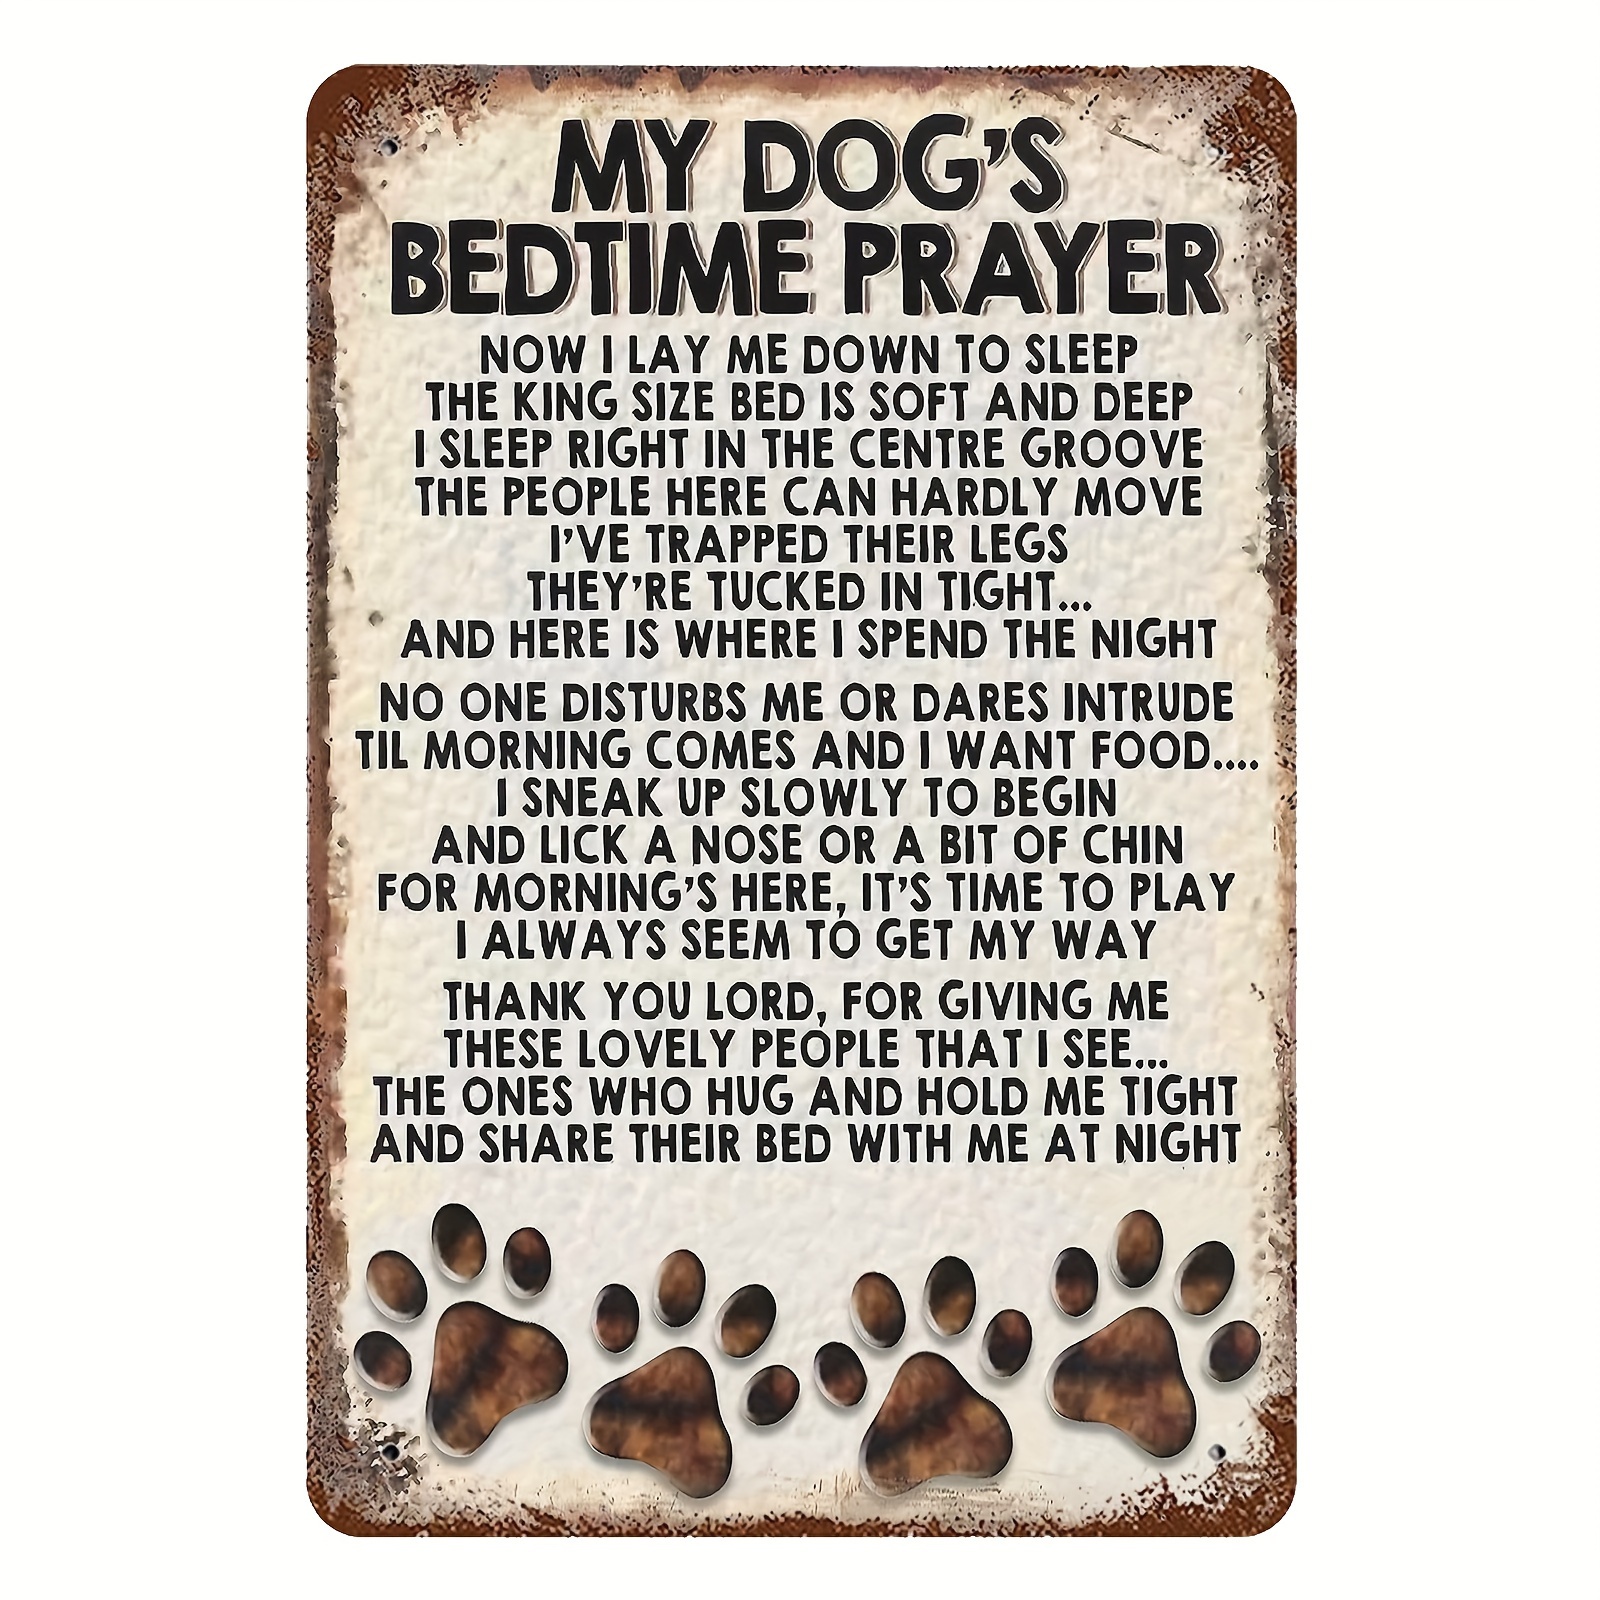 

Metal Sign, Vintage My Dog's Bedtime Prayer, Wall Decor Be The Person Your Dog Thinks You Are Poster Art For Home Living Room Bedroom Garden Garage Office Cafe Bar Pub 8x12inches Tinplate